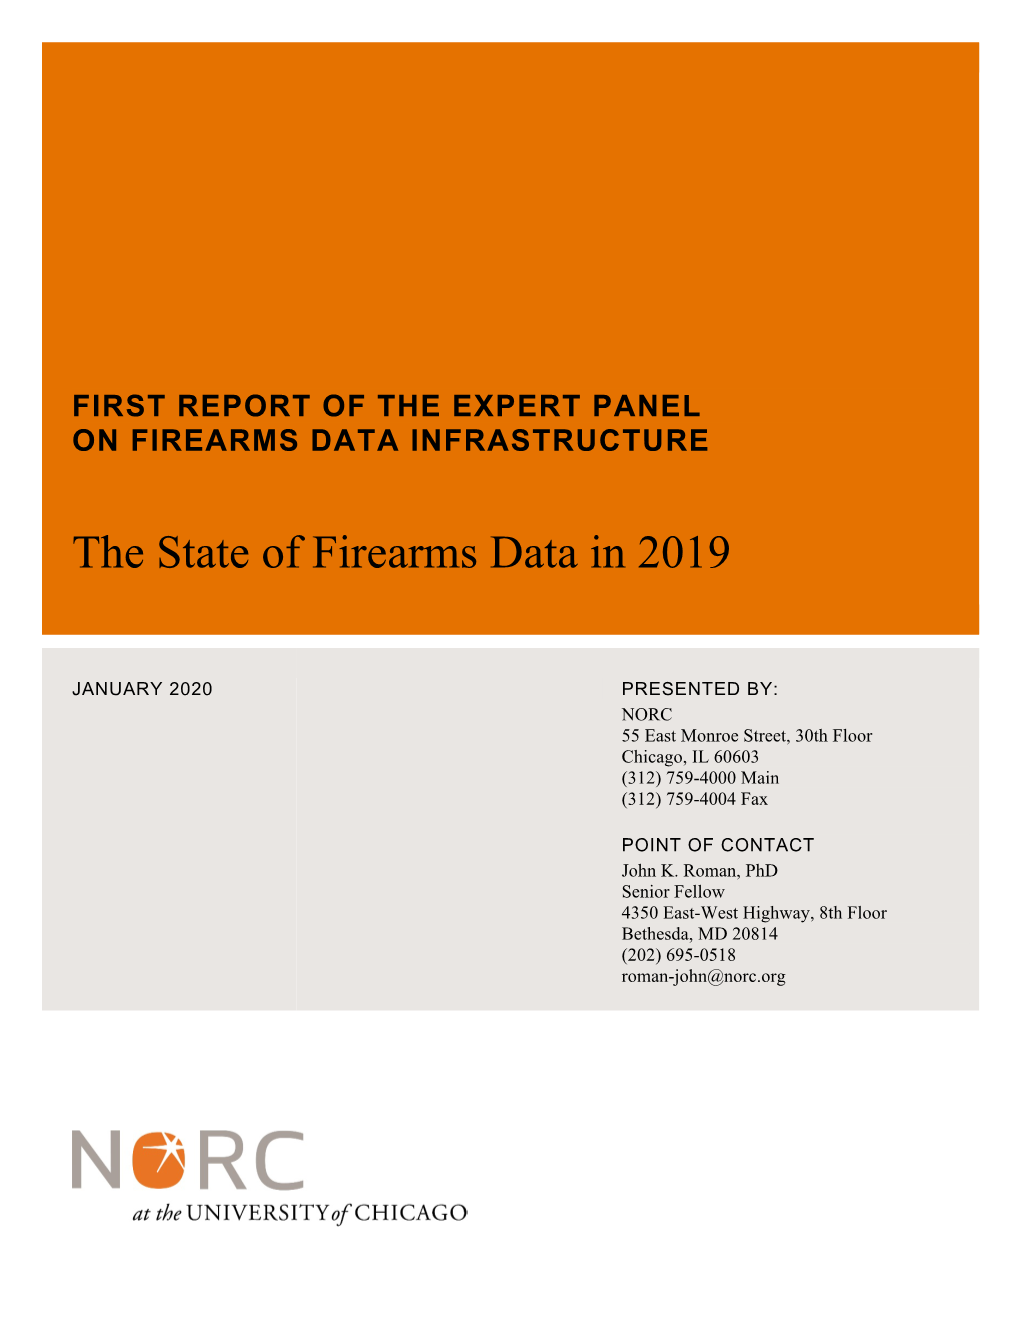 The State of Firearms Data in 2019